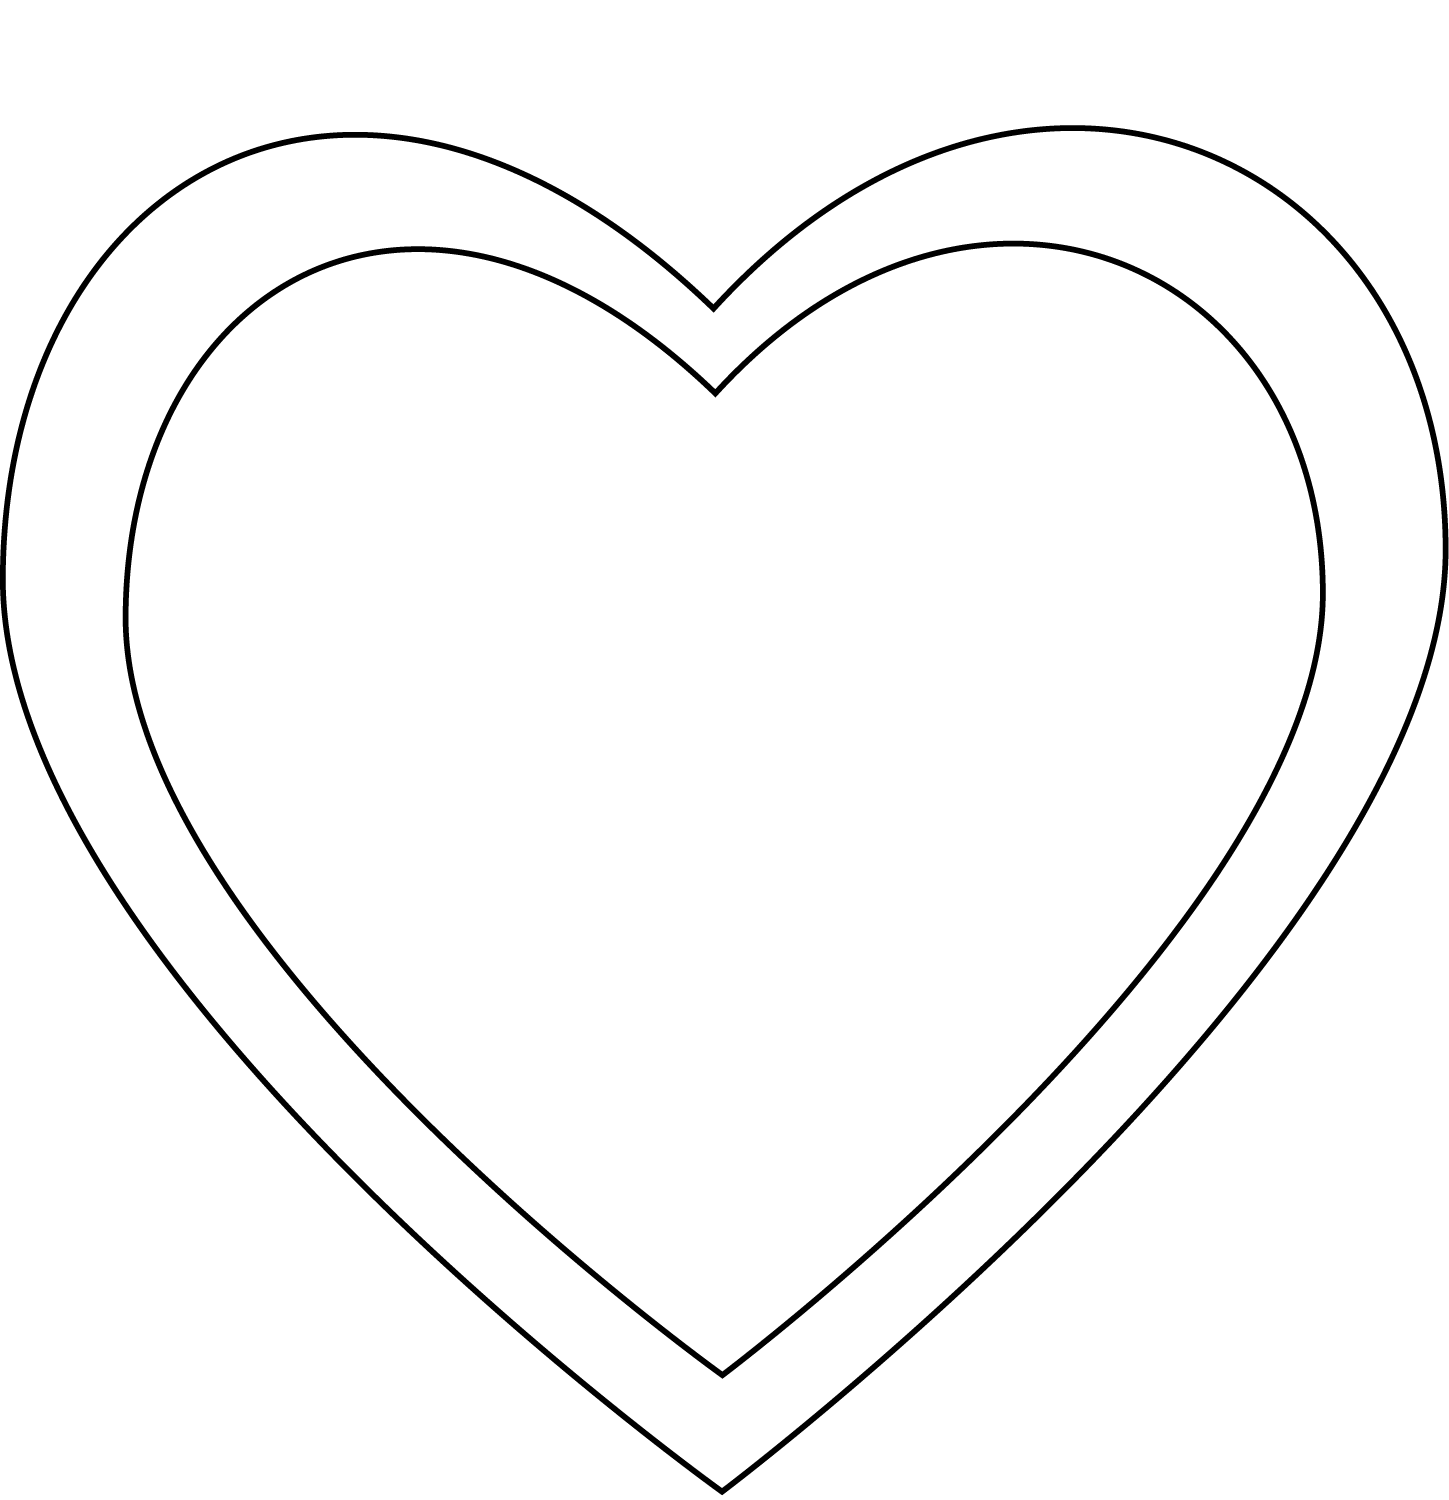 Simple Heart 4 Coloring Page